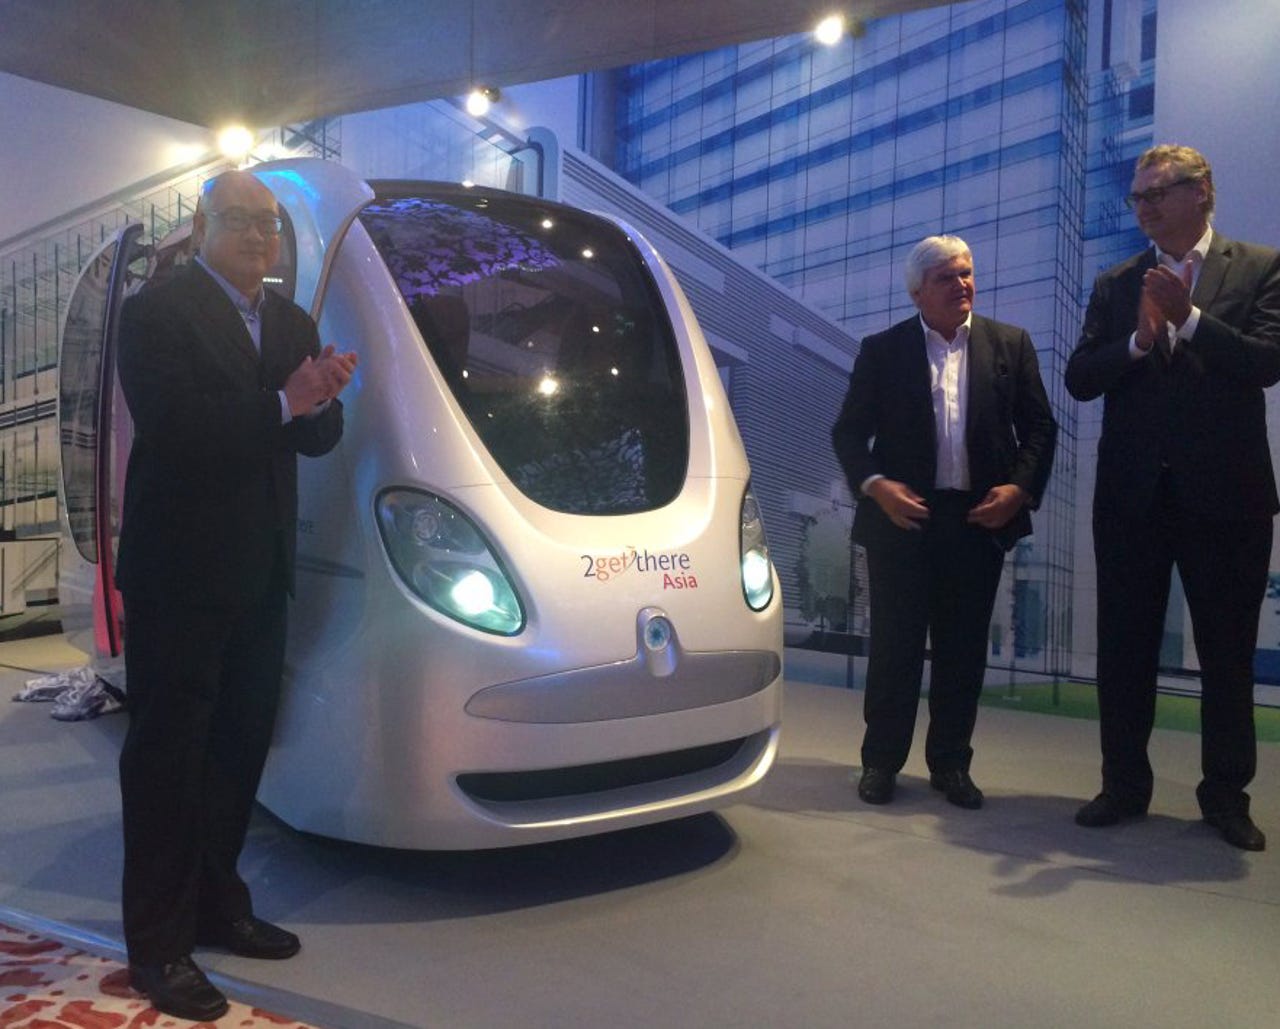 2getthere-smrt-joint-venture-driverless-vehicle.png